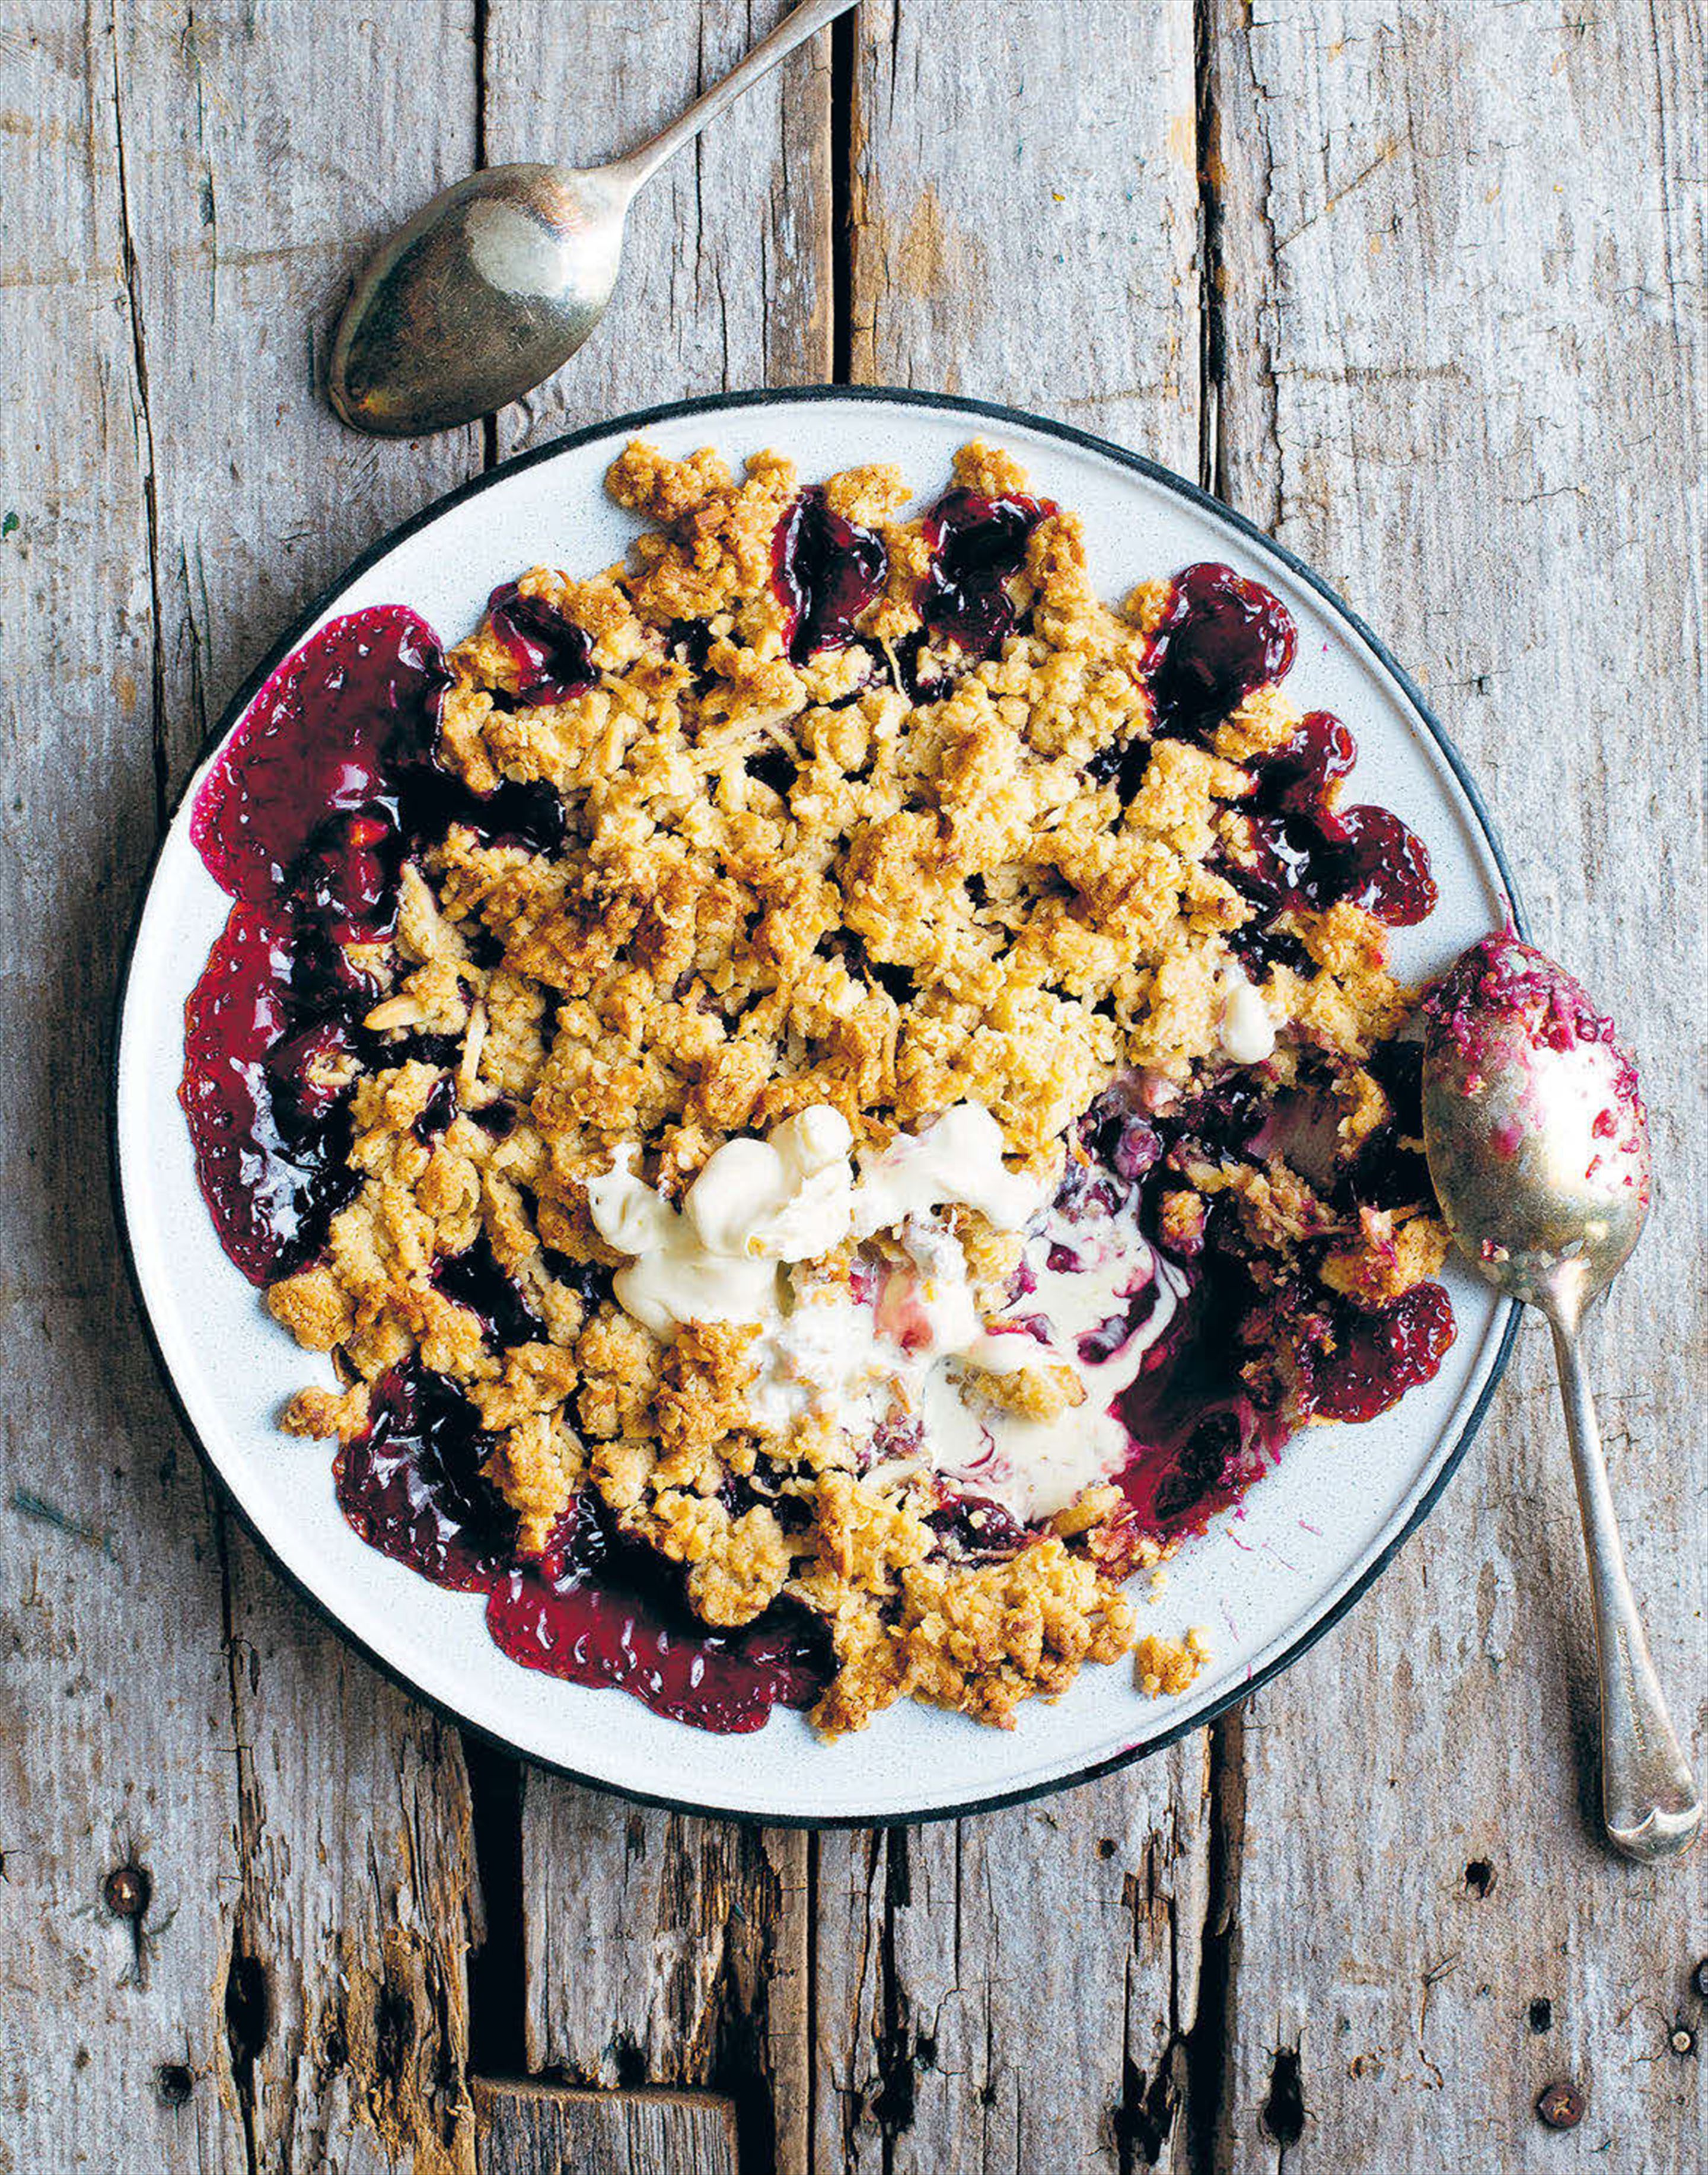 Cherry, blueberry and coconut bottomless pie